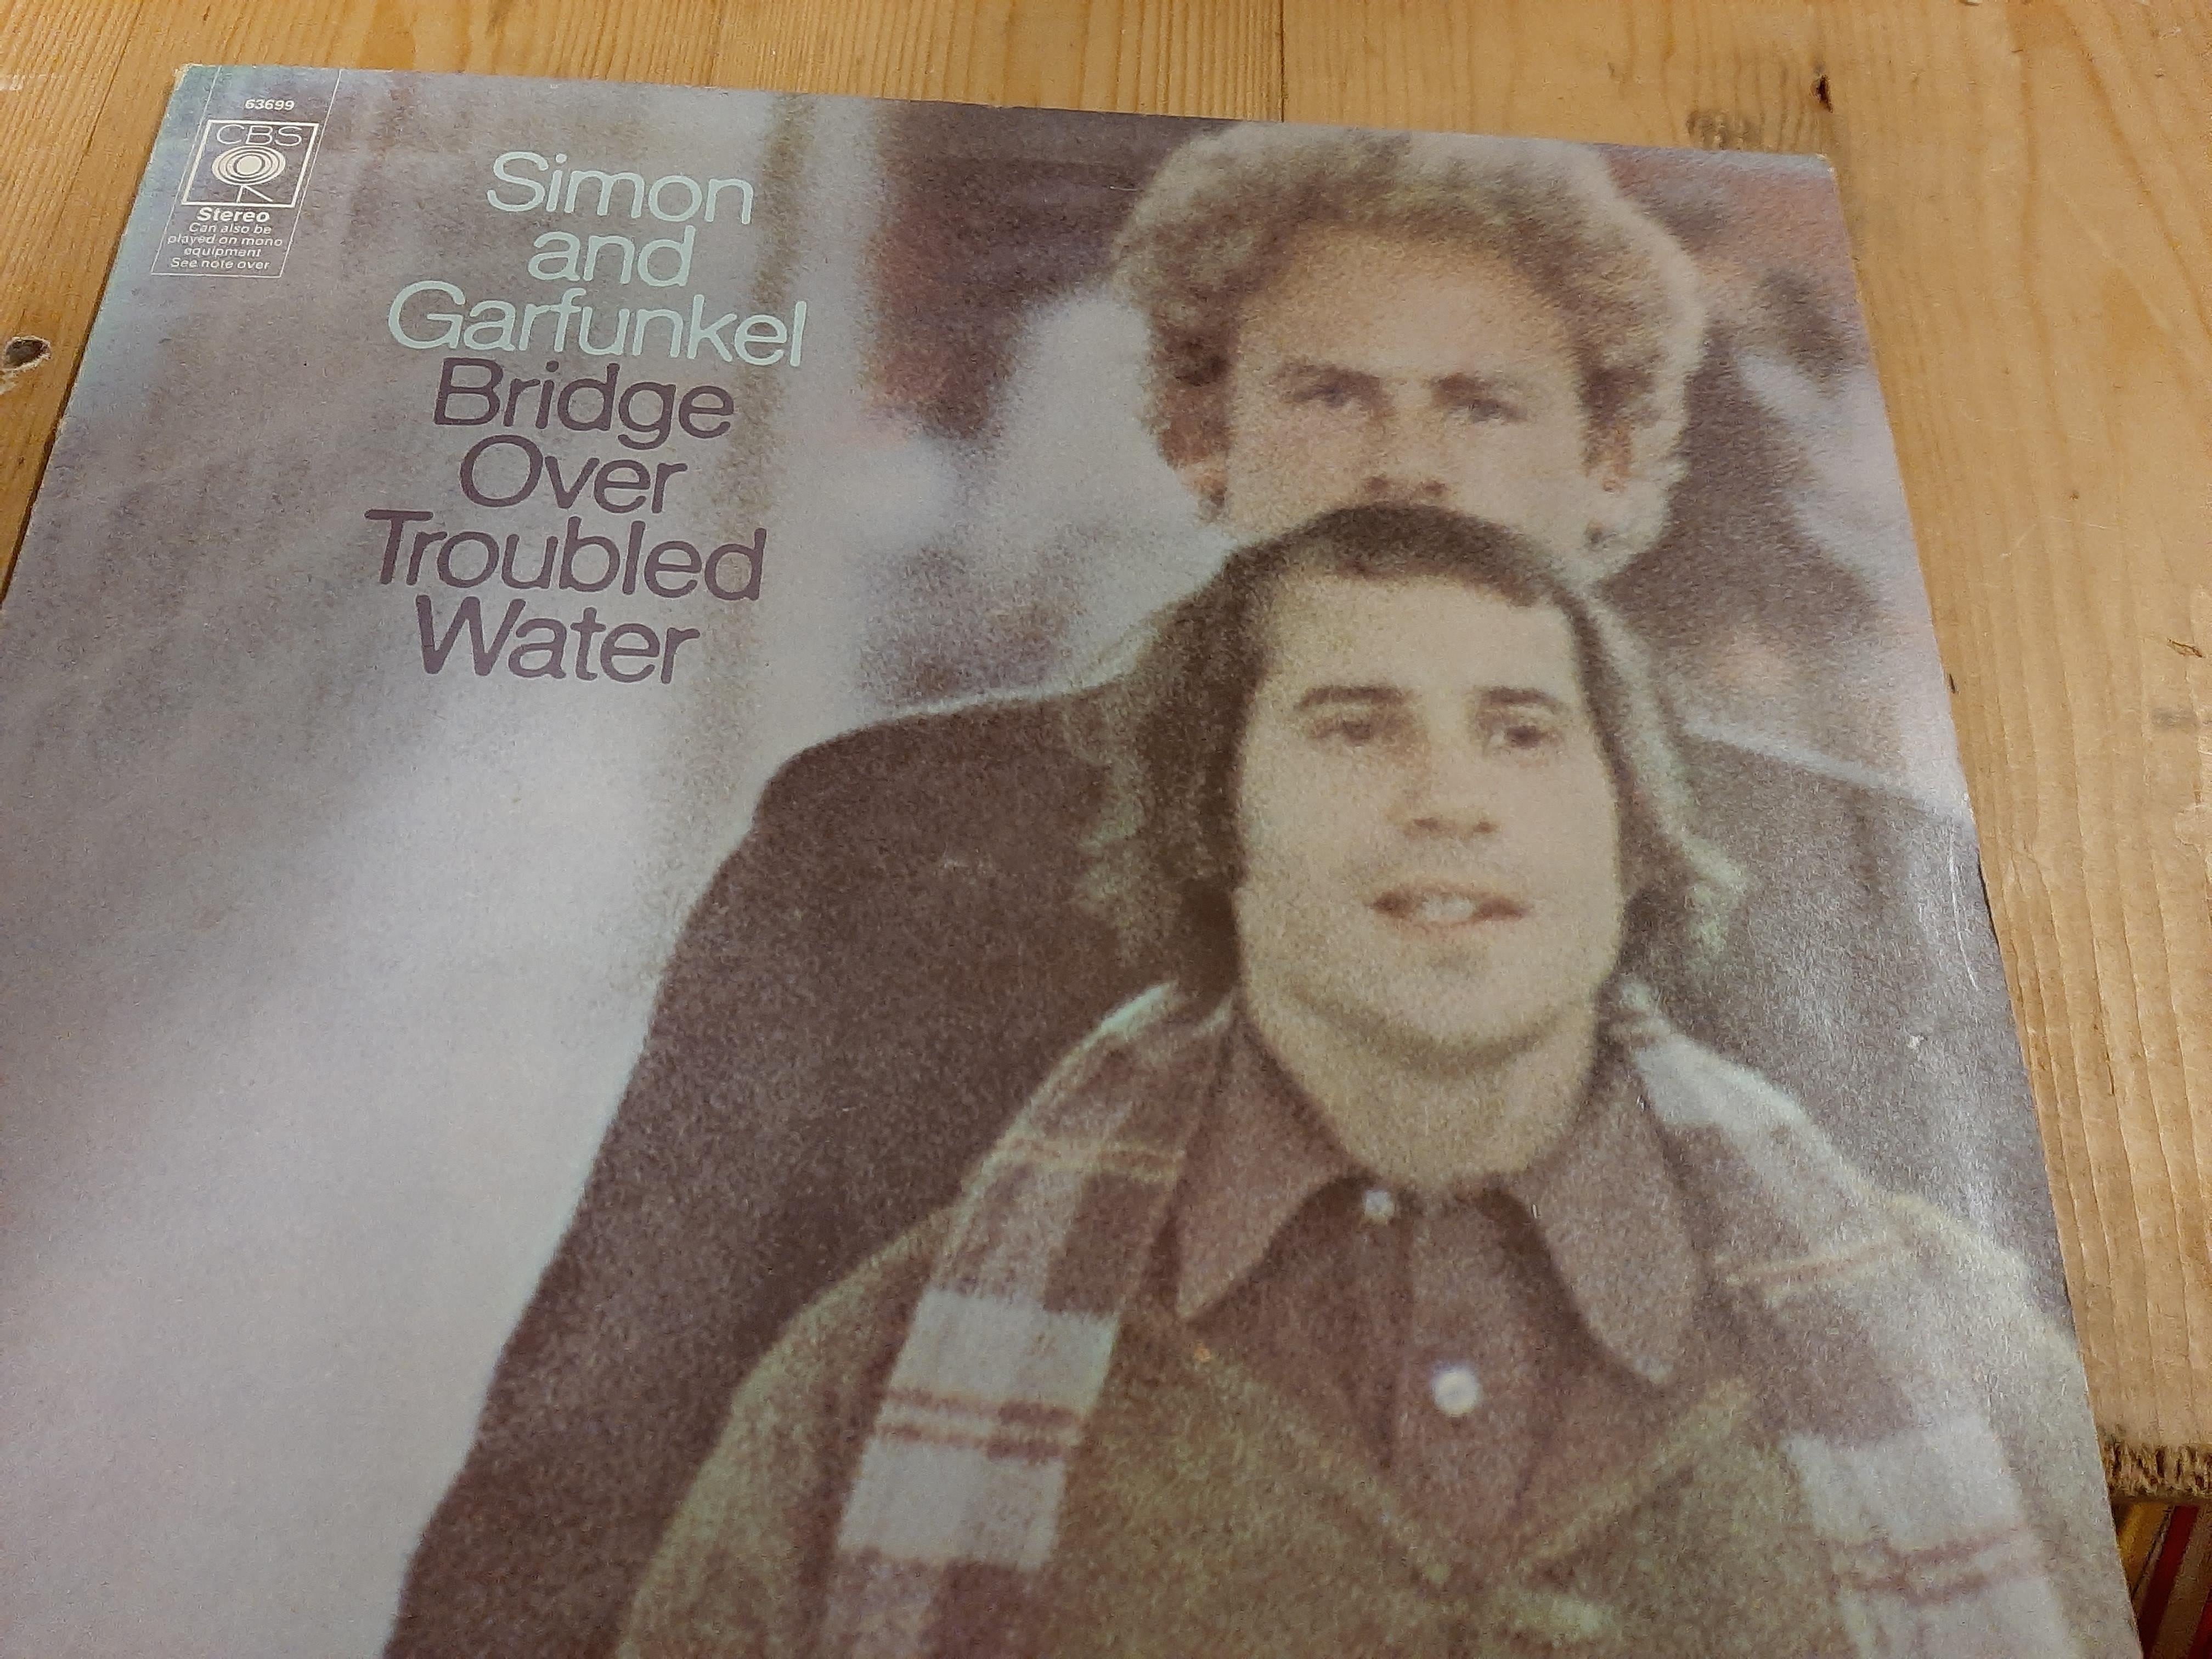 4 Vinyl Records: Simon & Garfunkel "Sounds of Silence" and "Bridge over Troubled Waters", t/w